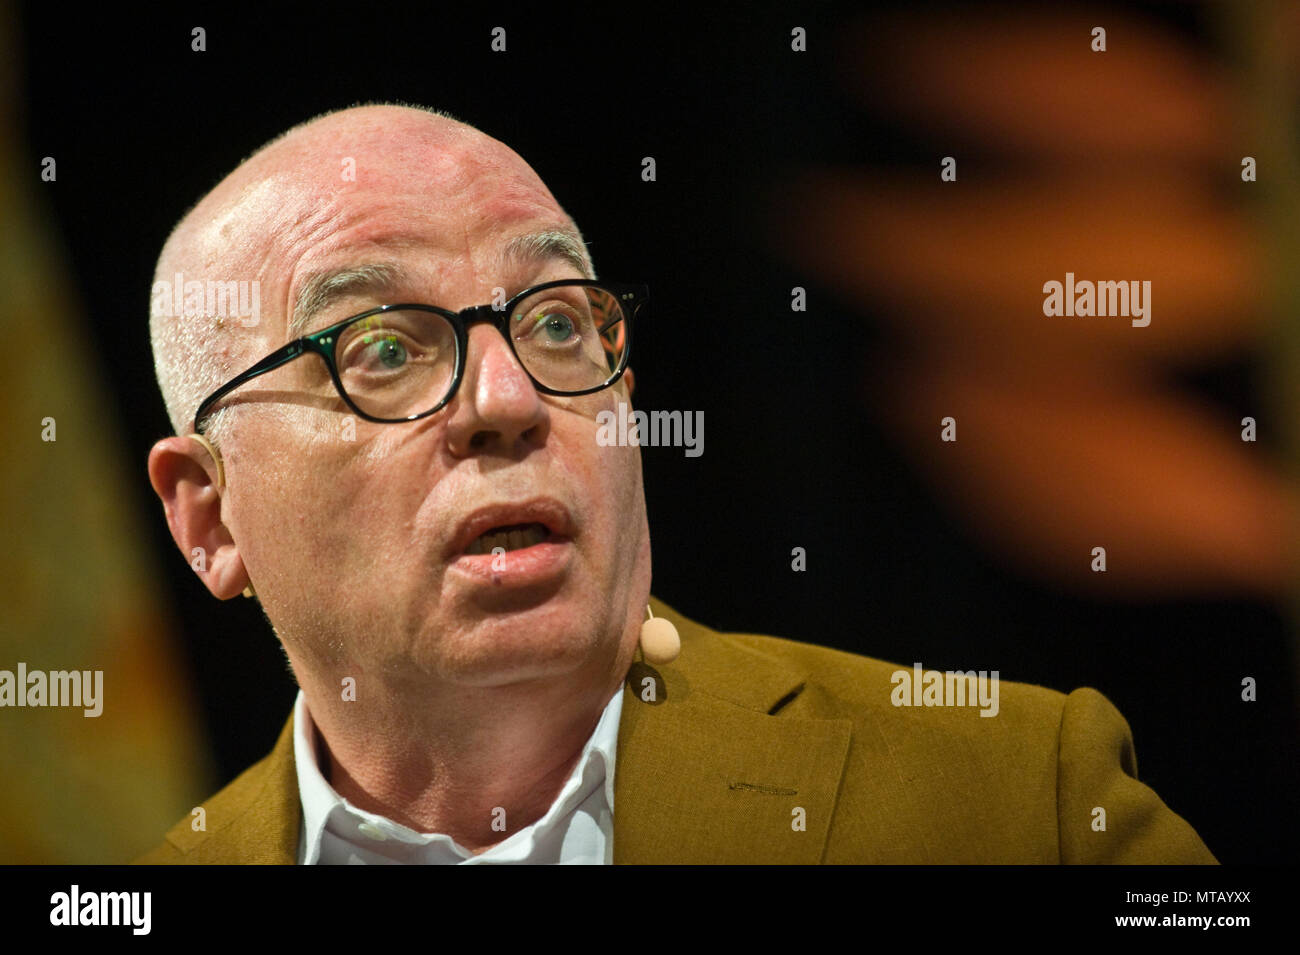 Michael Wolff journalist & author of Fire and Fury, detailing the chaos of the Trump White House, speaking on stage at Hay Festival 2018 Hay-on-Wye Powys Wales UK Stock Photo